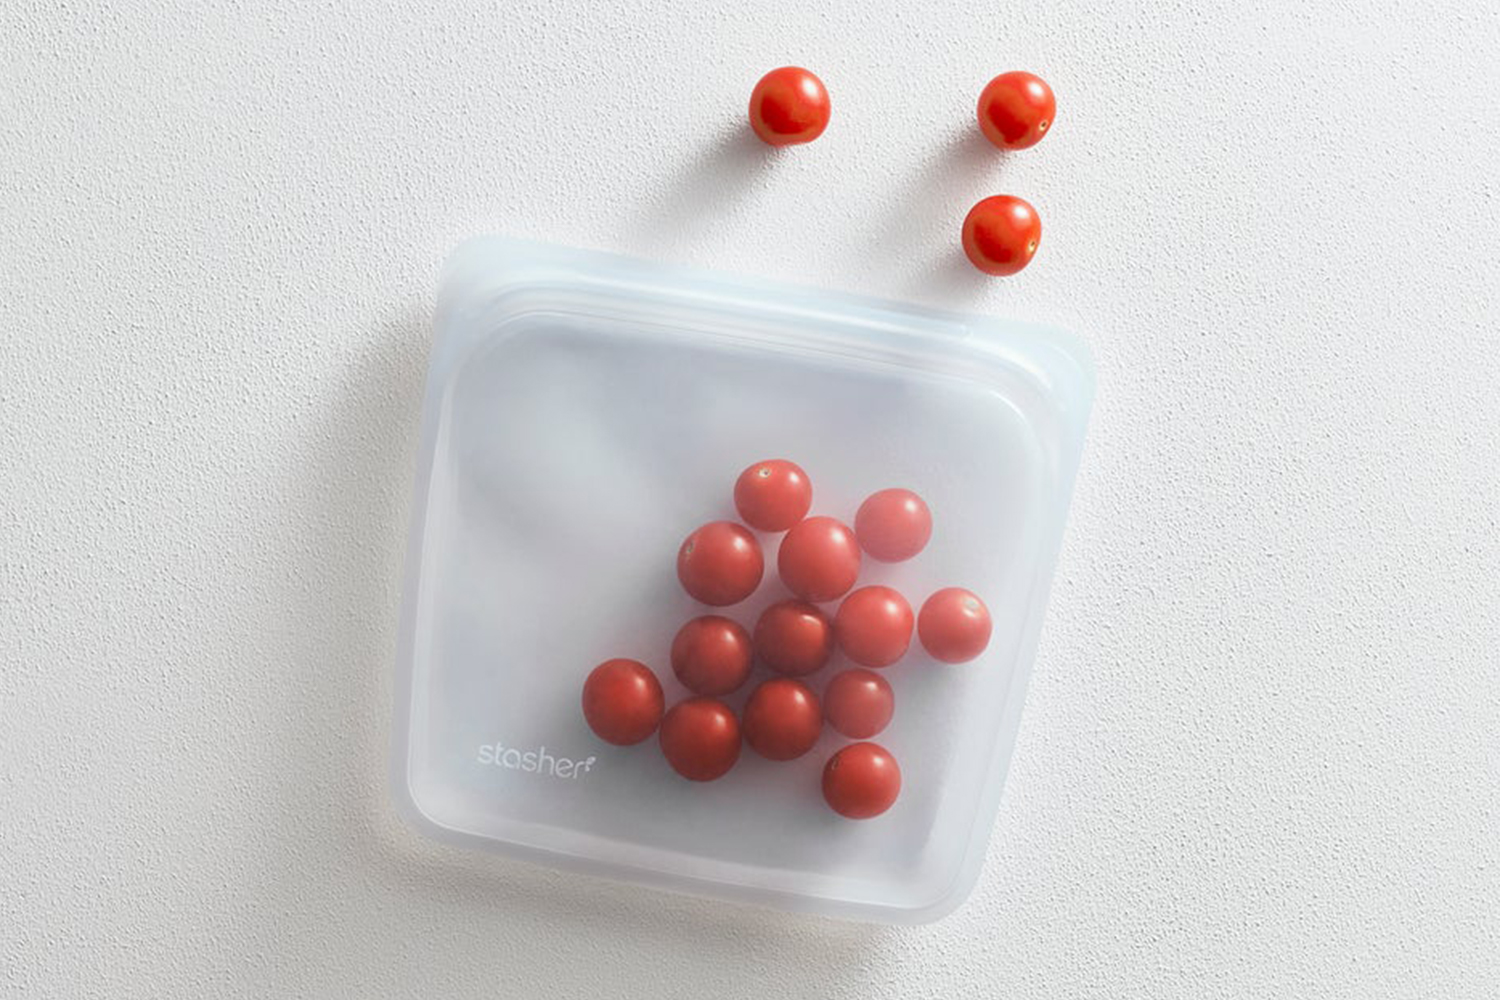 A clear Stasher storage bag with cherry tomatoes inside and laying on a table. Here's why you need these reusable platinum silicone bags in your kitchen and elsewhere.